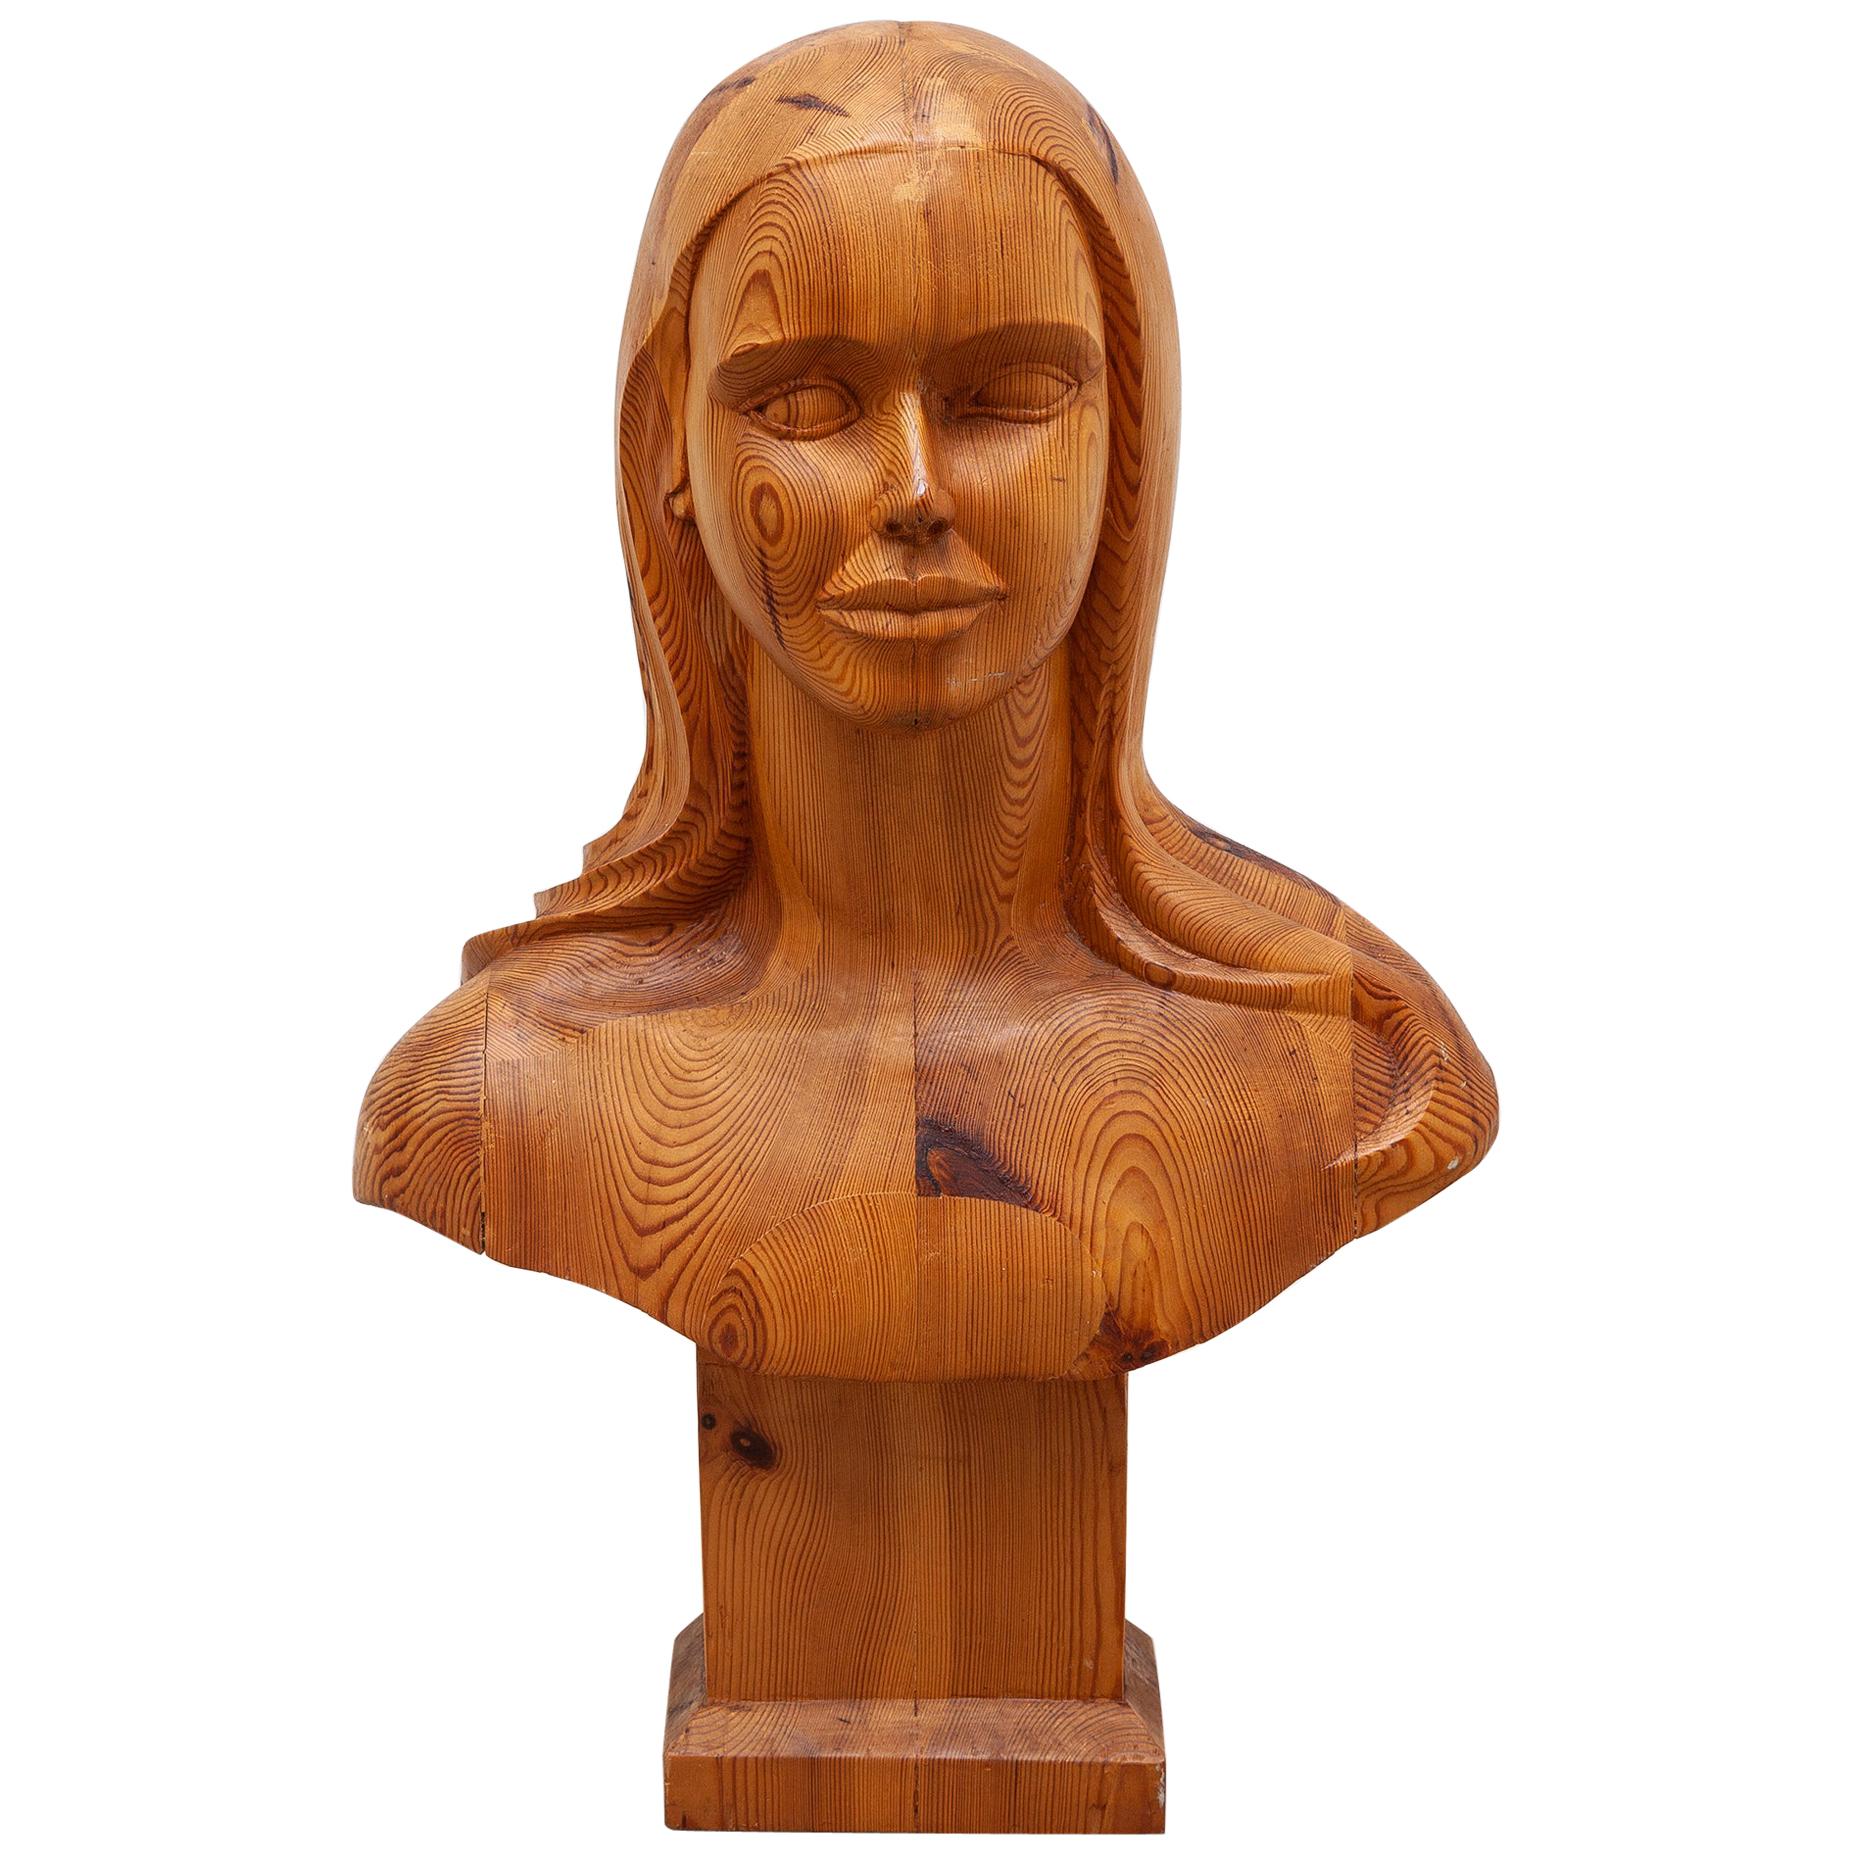 French Women Bust Sculpture "Marianne" Godess of Liberty in Solid Wood, 1960s For Sale